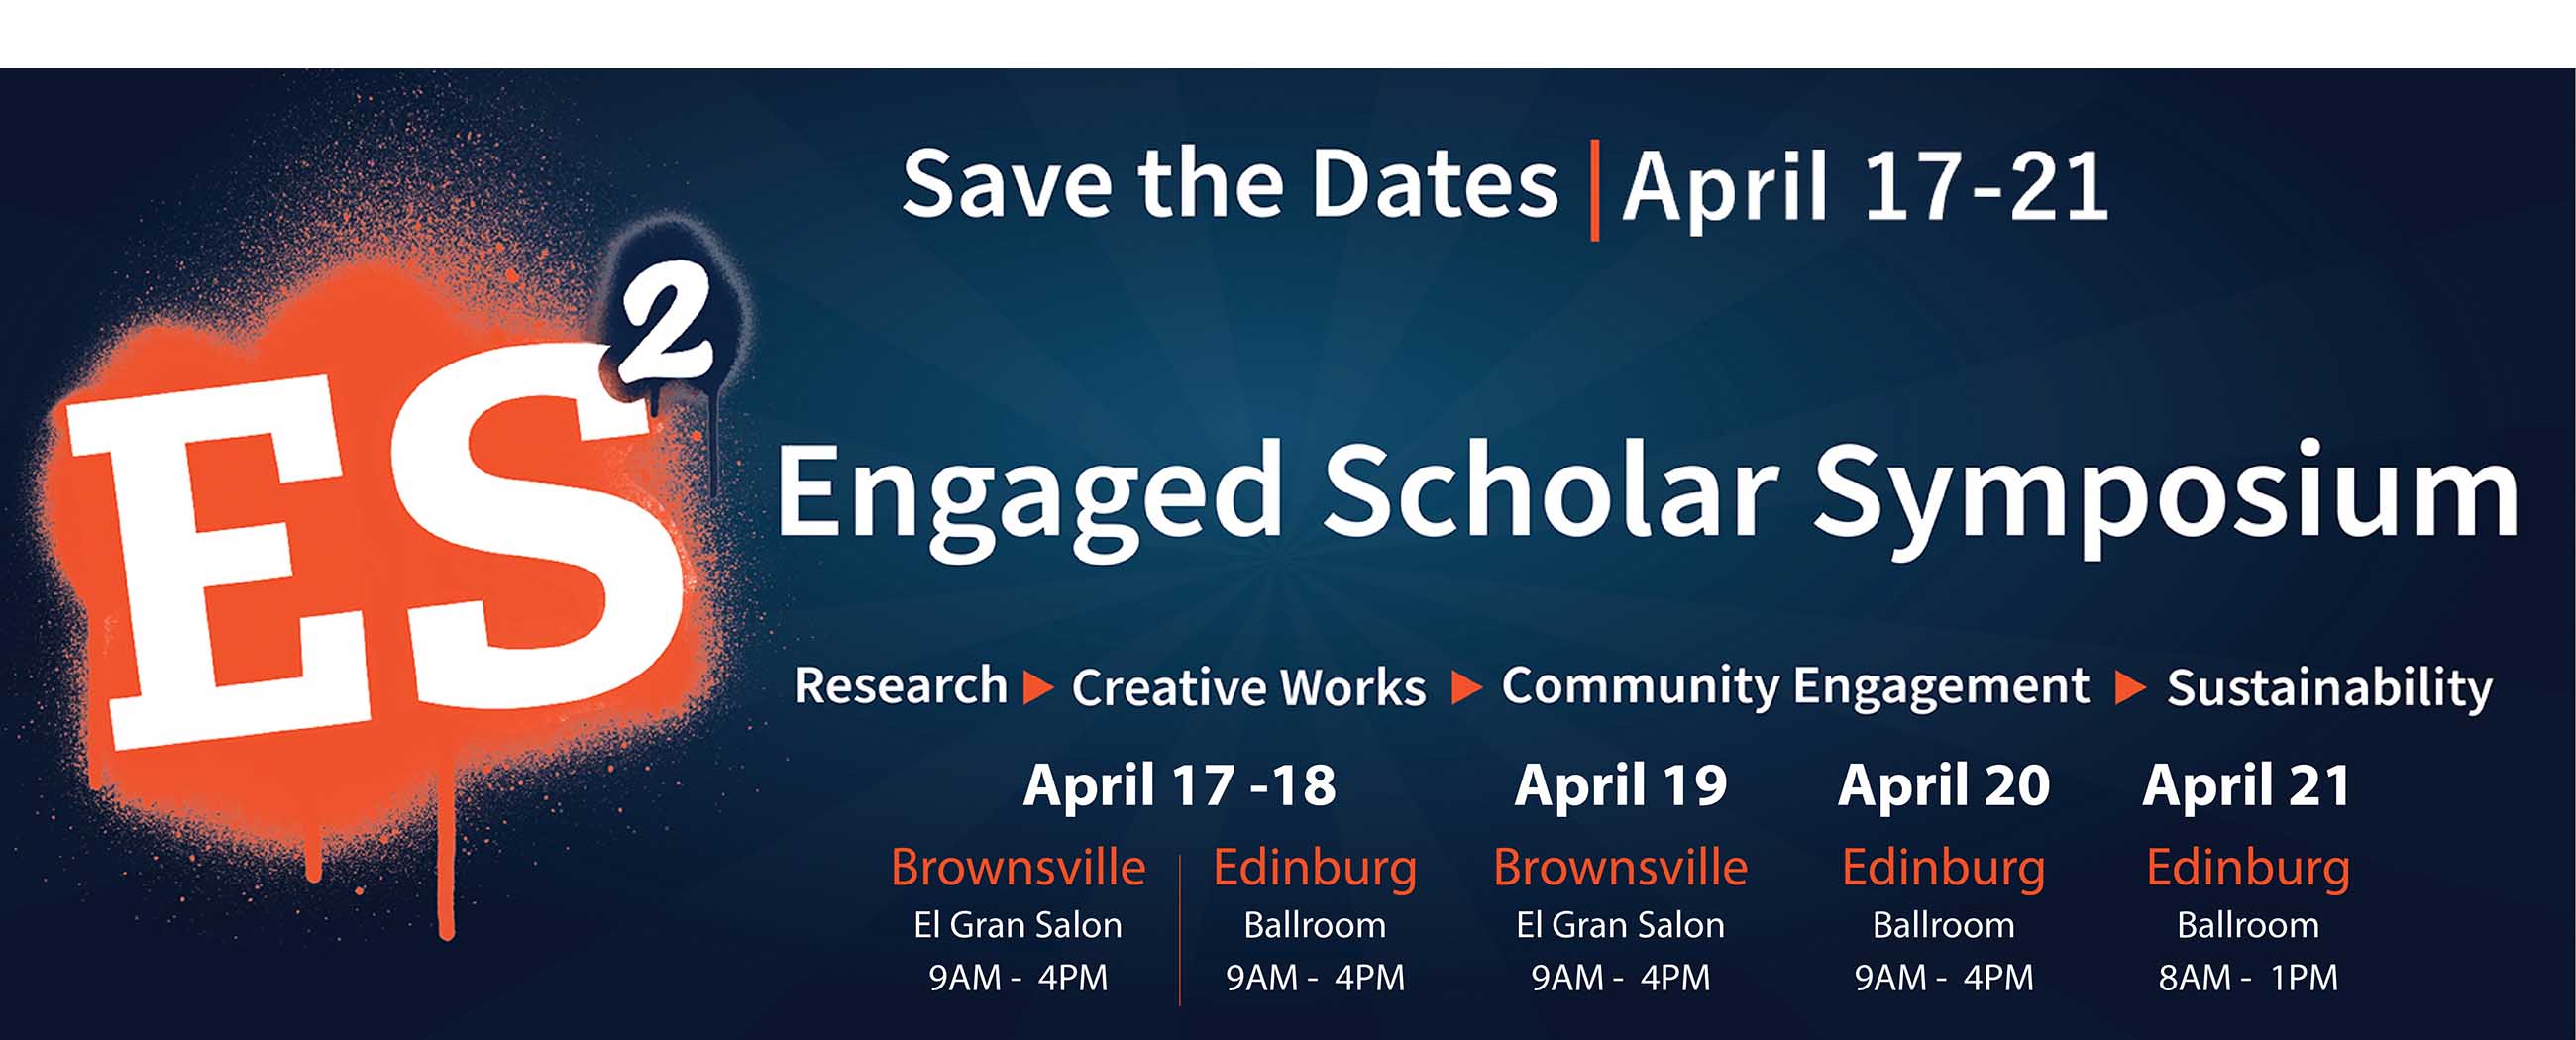 Save the Dates April 17-21. Engaged Scholar Symposium. Research, Creative Works, Community Engagement, Sustainability. April 17-18 Brownsville El Gran Salon 9AM - 4PM and Edinburg Ballroom 9AM - 4PM. April 19 Brownsville El Gran Salon 9AM - 4PM. April 20 Edinburg Ballroom 9AM - 4PM. April 21 Edinburg Ballroom 8AM - 1PM Page Banner 